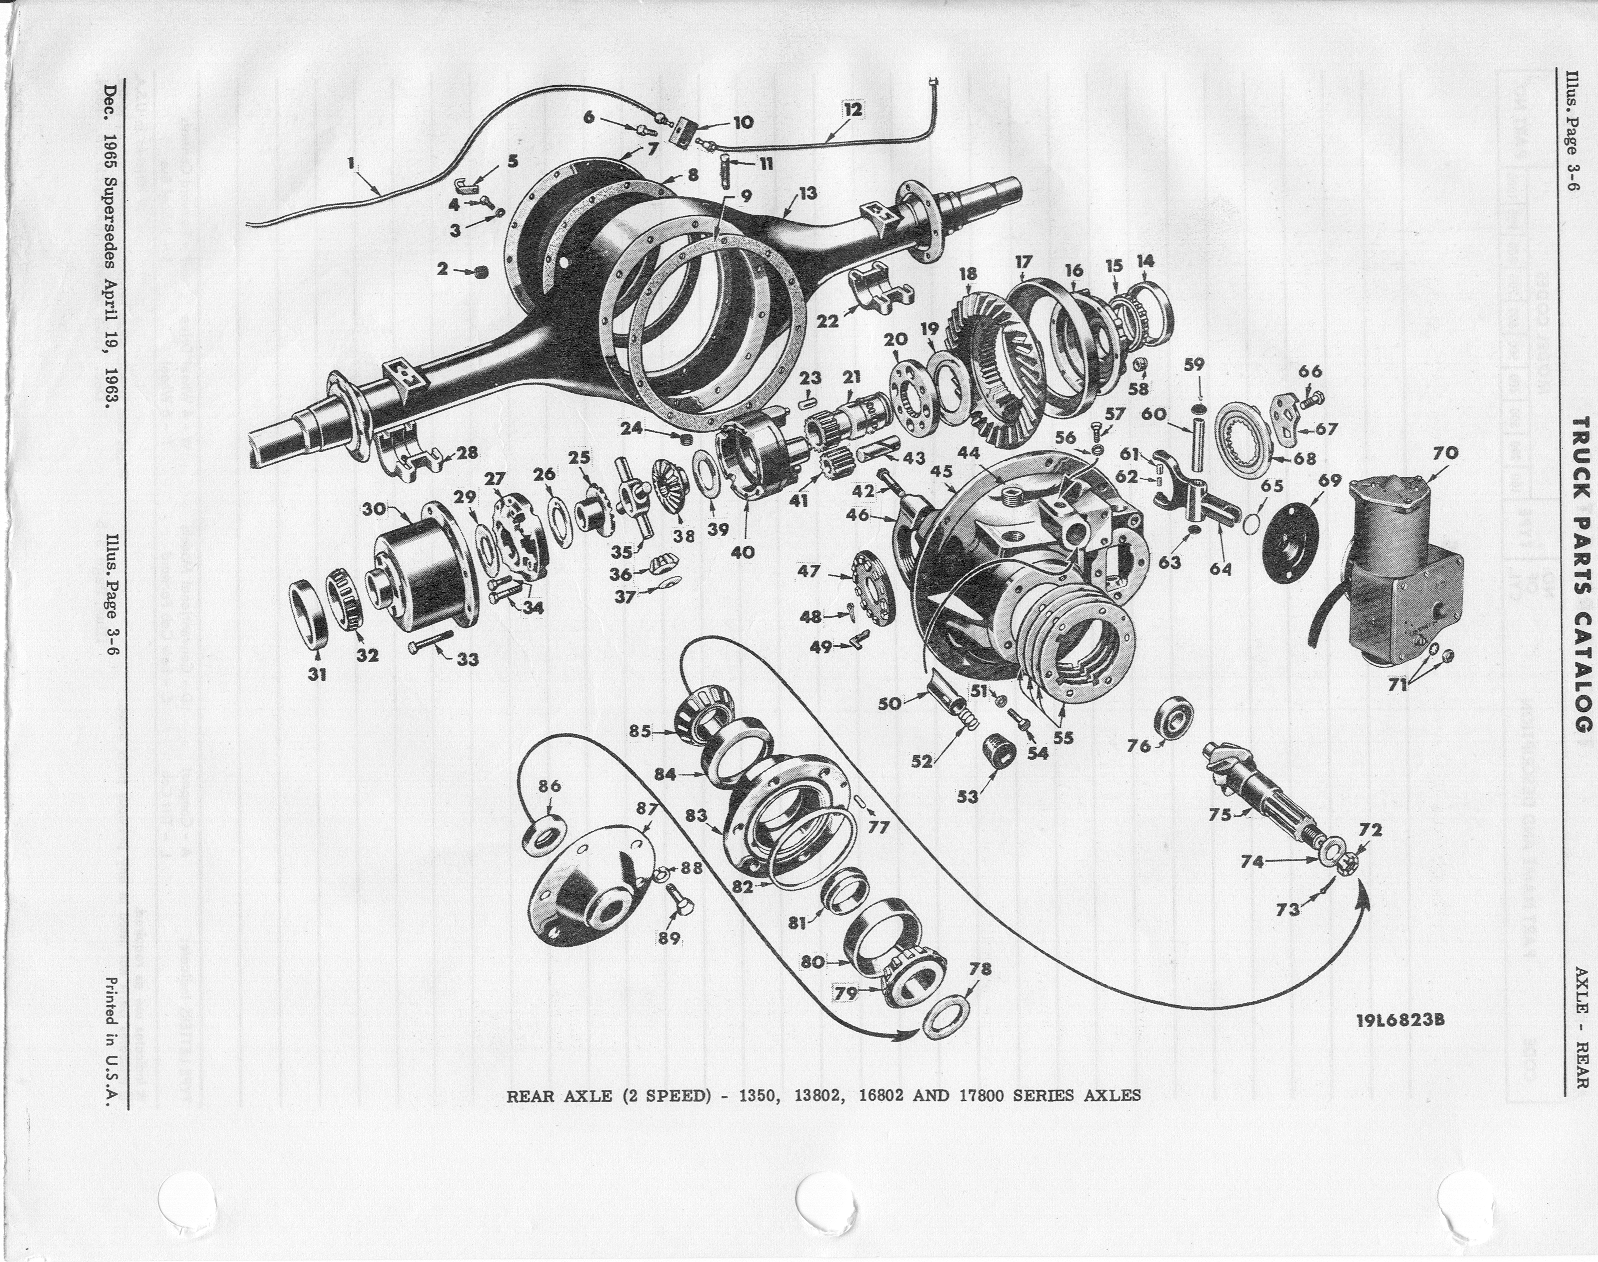 Sweptline Org - 1963-1968 Online Parts Catalog - Axle